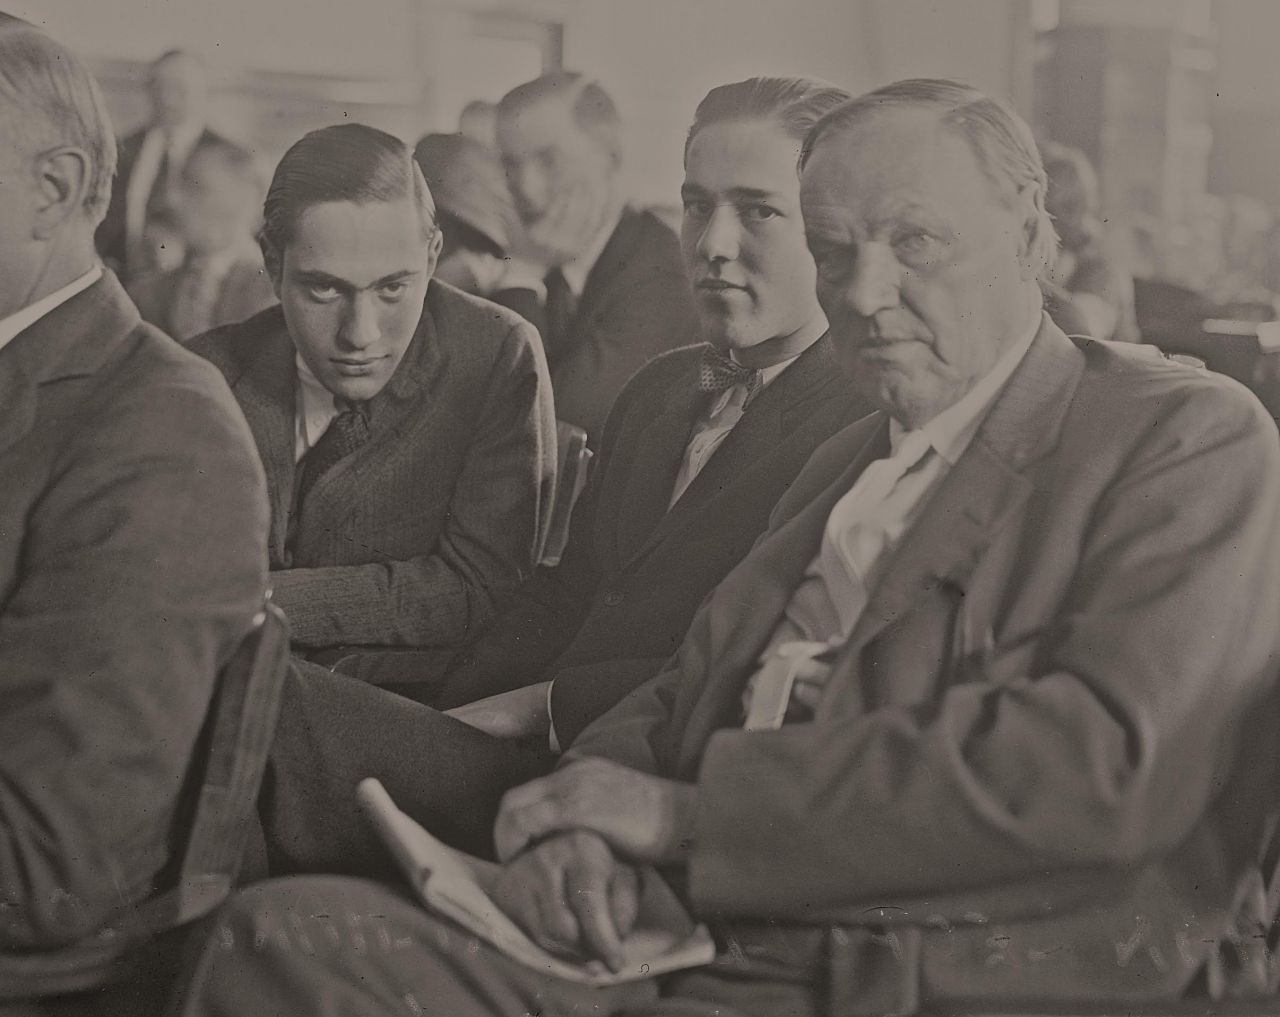 Group portrait of Nathan Leopold Jr., Richard Loeb and Clarence Darrow, defense attorney for Leopold and Loeb, in a crowded courtroom in Chicago, during the Leopold and Loeb murder trial. Benjamin Bachrach, defense attorney, is seated in front of Darrow. (Courtesy of Chicago History Museum)